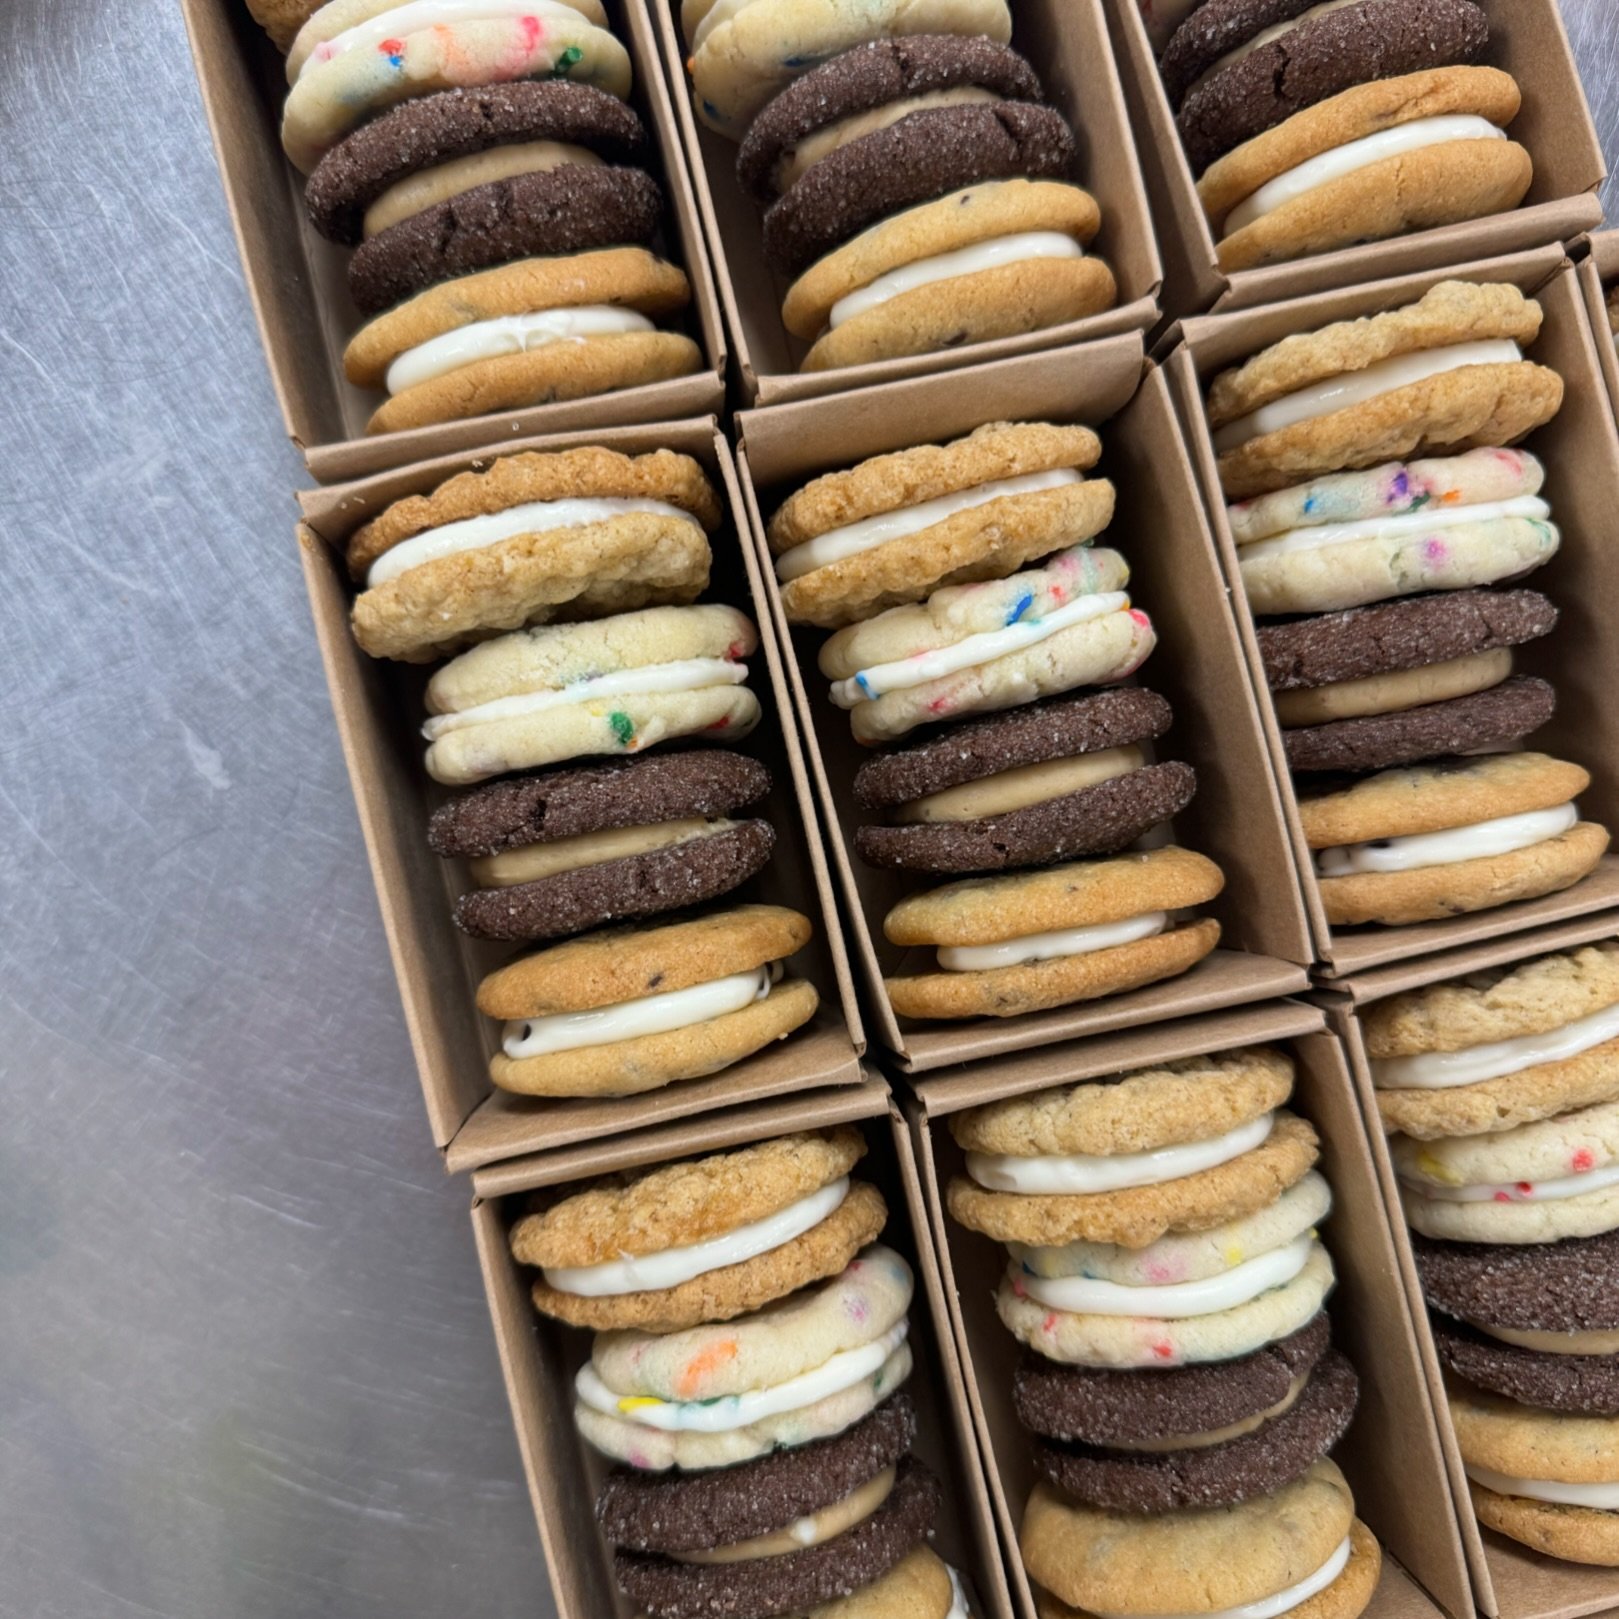 Mini cookie sandwich packs✨
💜Chocolate fudge Cookies with Peanut butter cheesecake
💜Birthday Cookies with Sprinkle cheesecake
💜Oatmeal cream pies
💜Chocolate chip cookies with chocolate chip cheesecake 

Available at all locations while supplies l